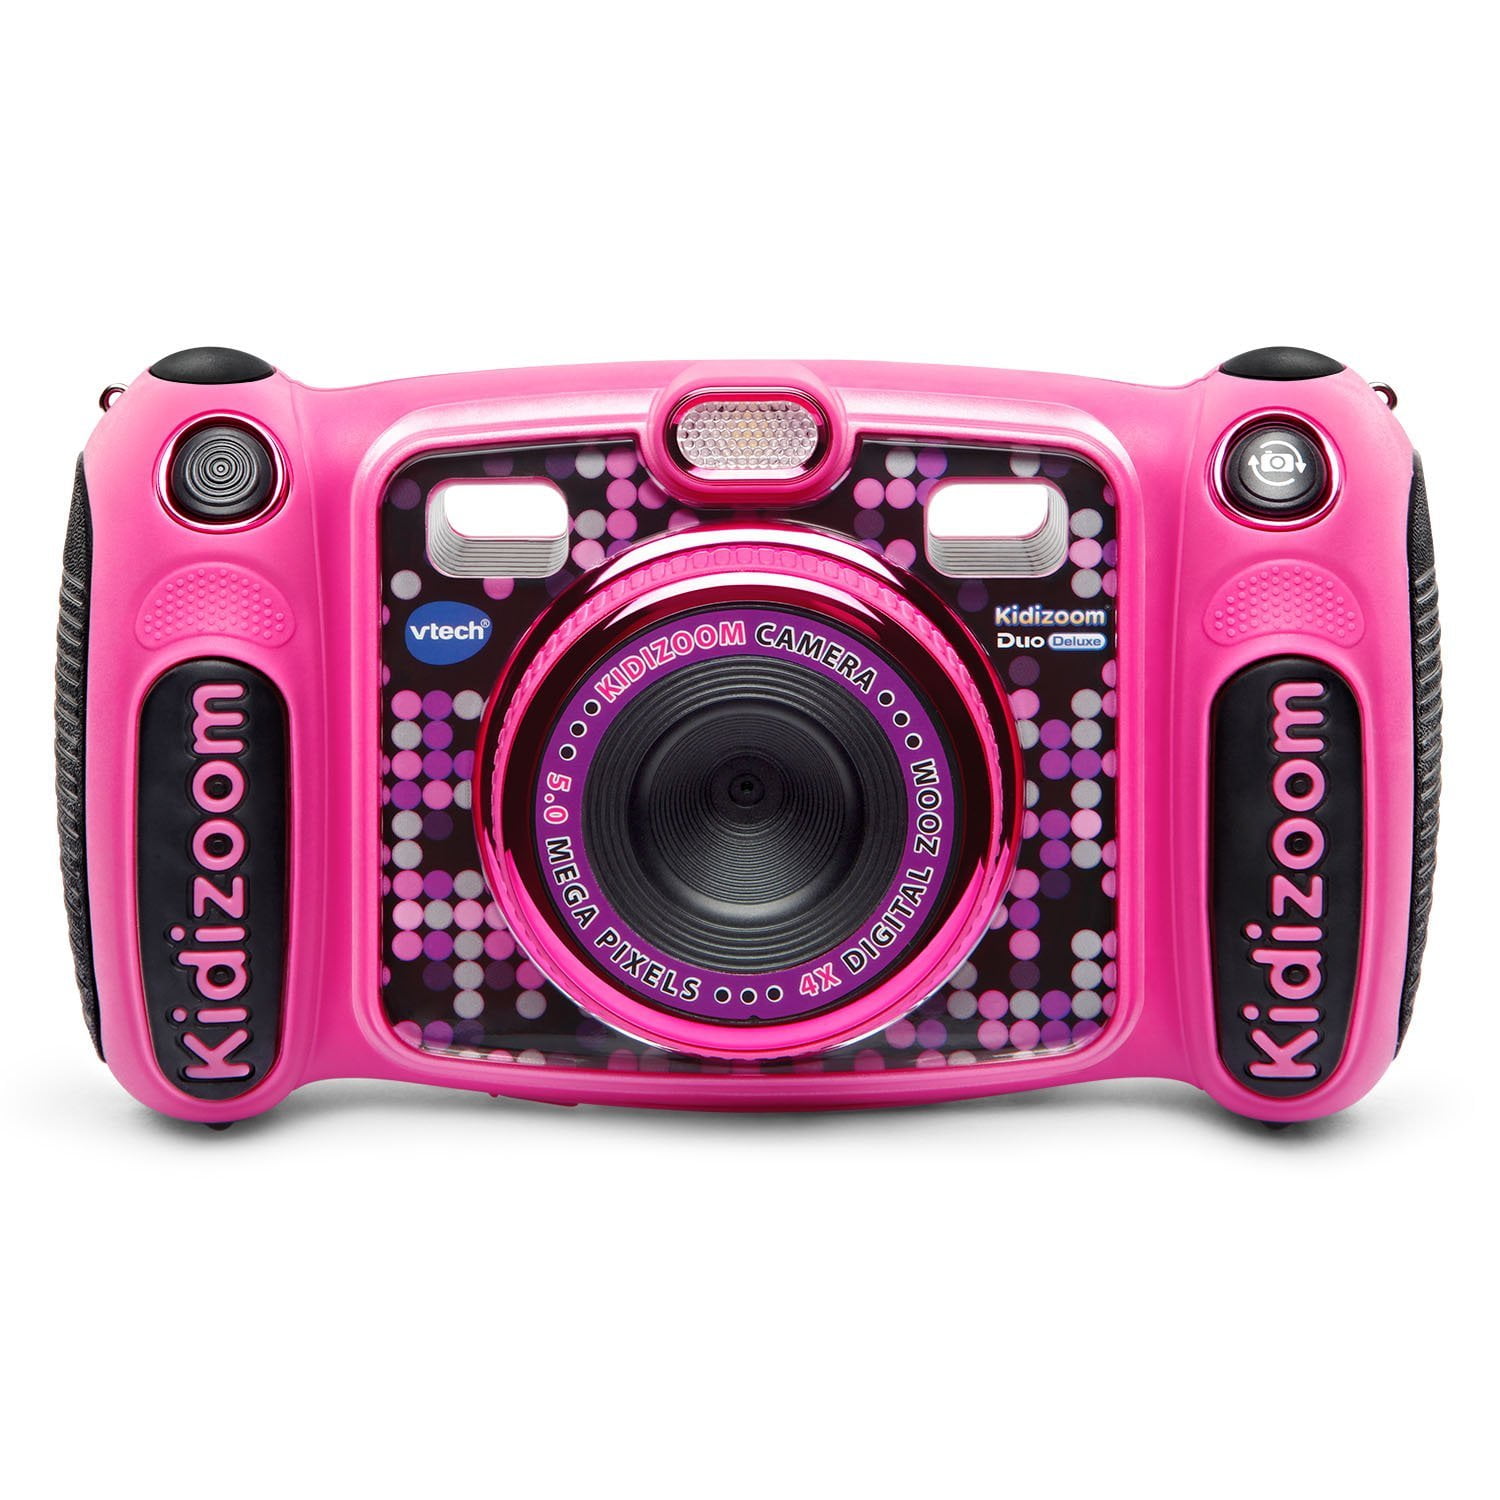 VTech 507153 Kidizoom Duo 5.0 Pink Toy Camera 